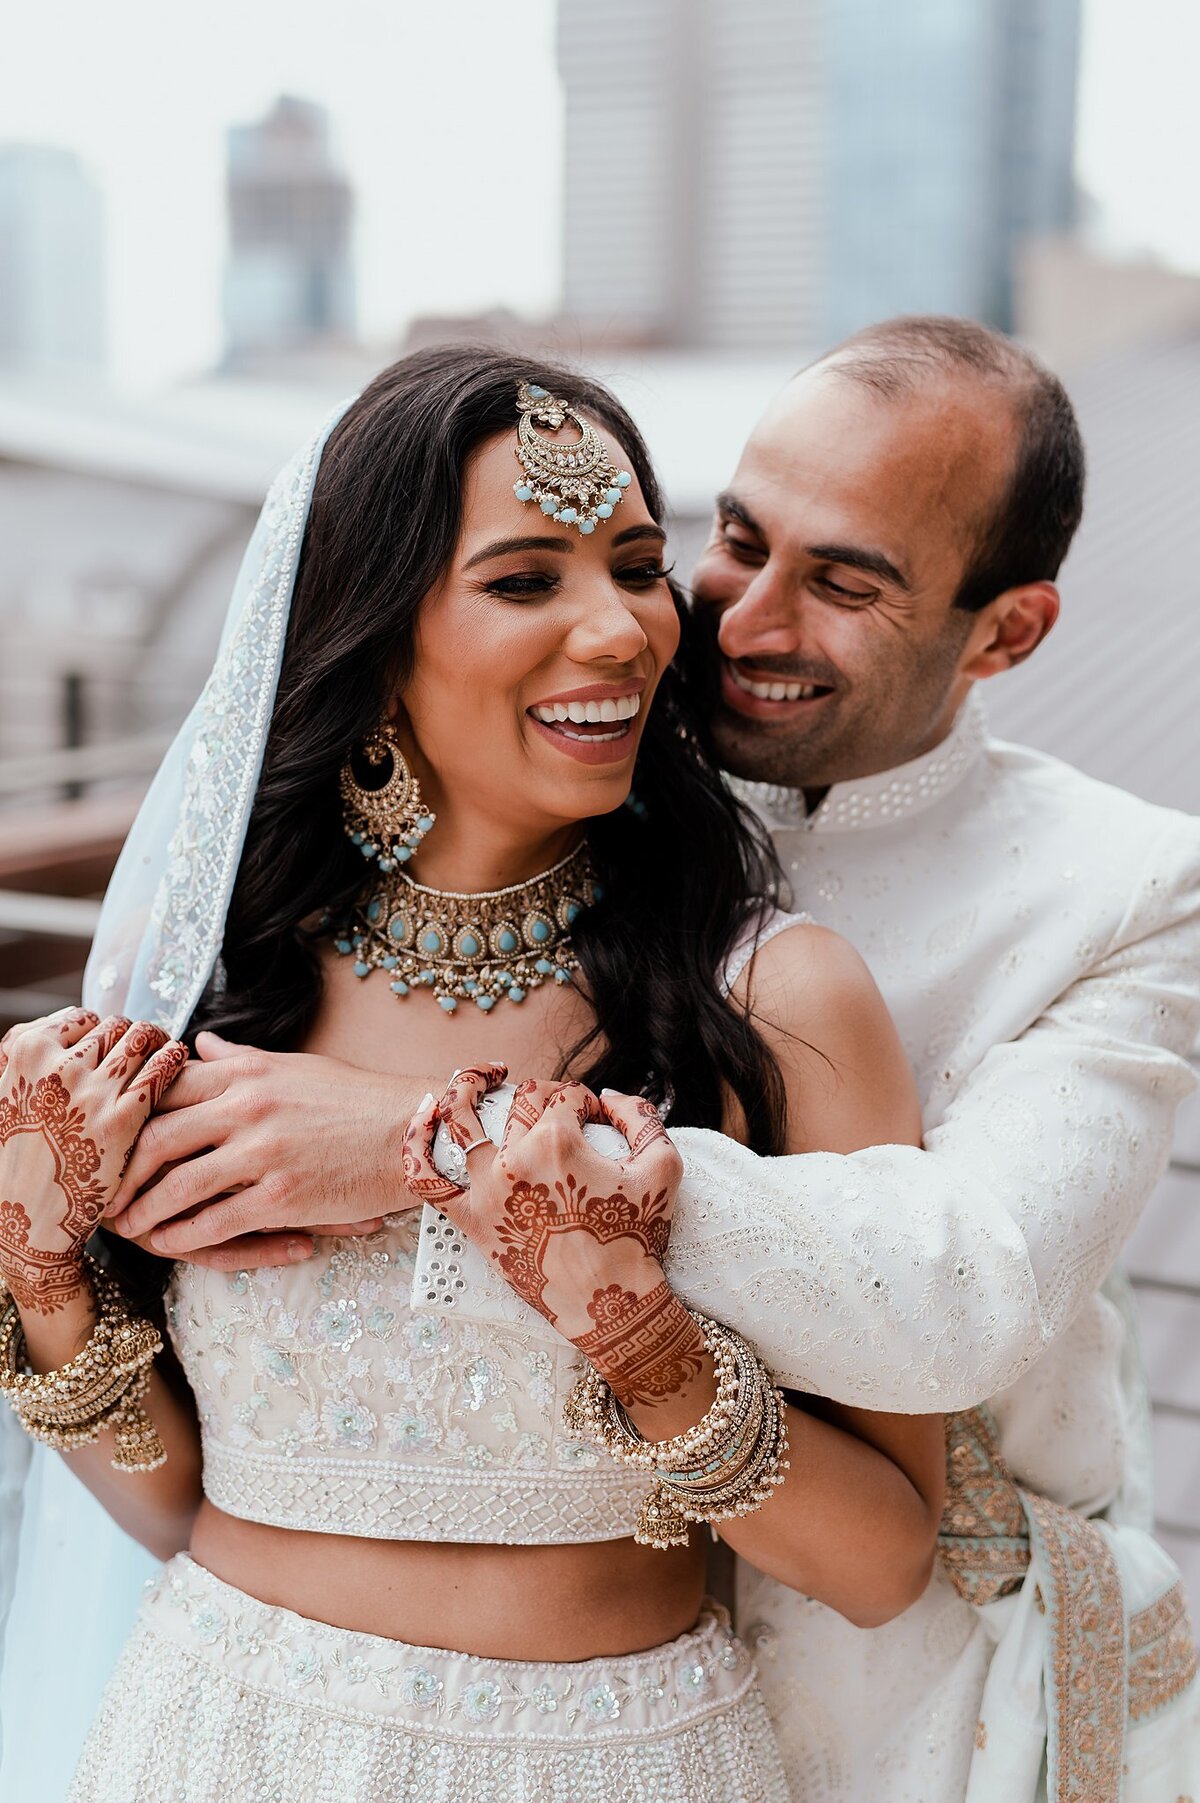 Indian Bride wearing a white beaded saree with a light blue dupatta with gold and light blue Indian wedding jewelry shows off her wedding henna as the groom embraces her. The Indian Groom is wearing a white sherwani with a light blue and gold dupatta. He smiles down at the bride who is laughing.